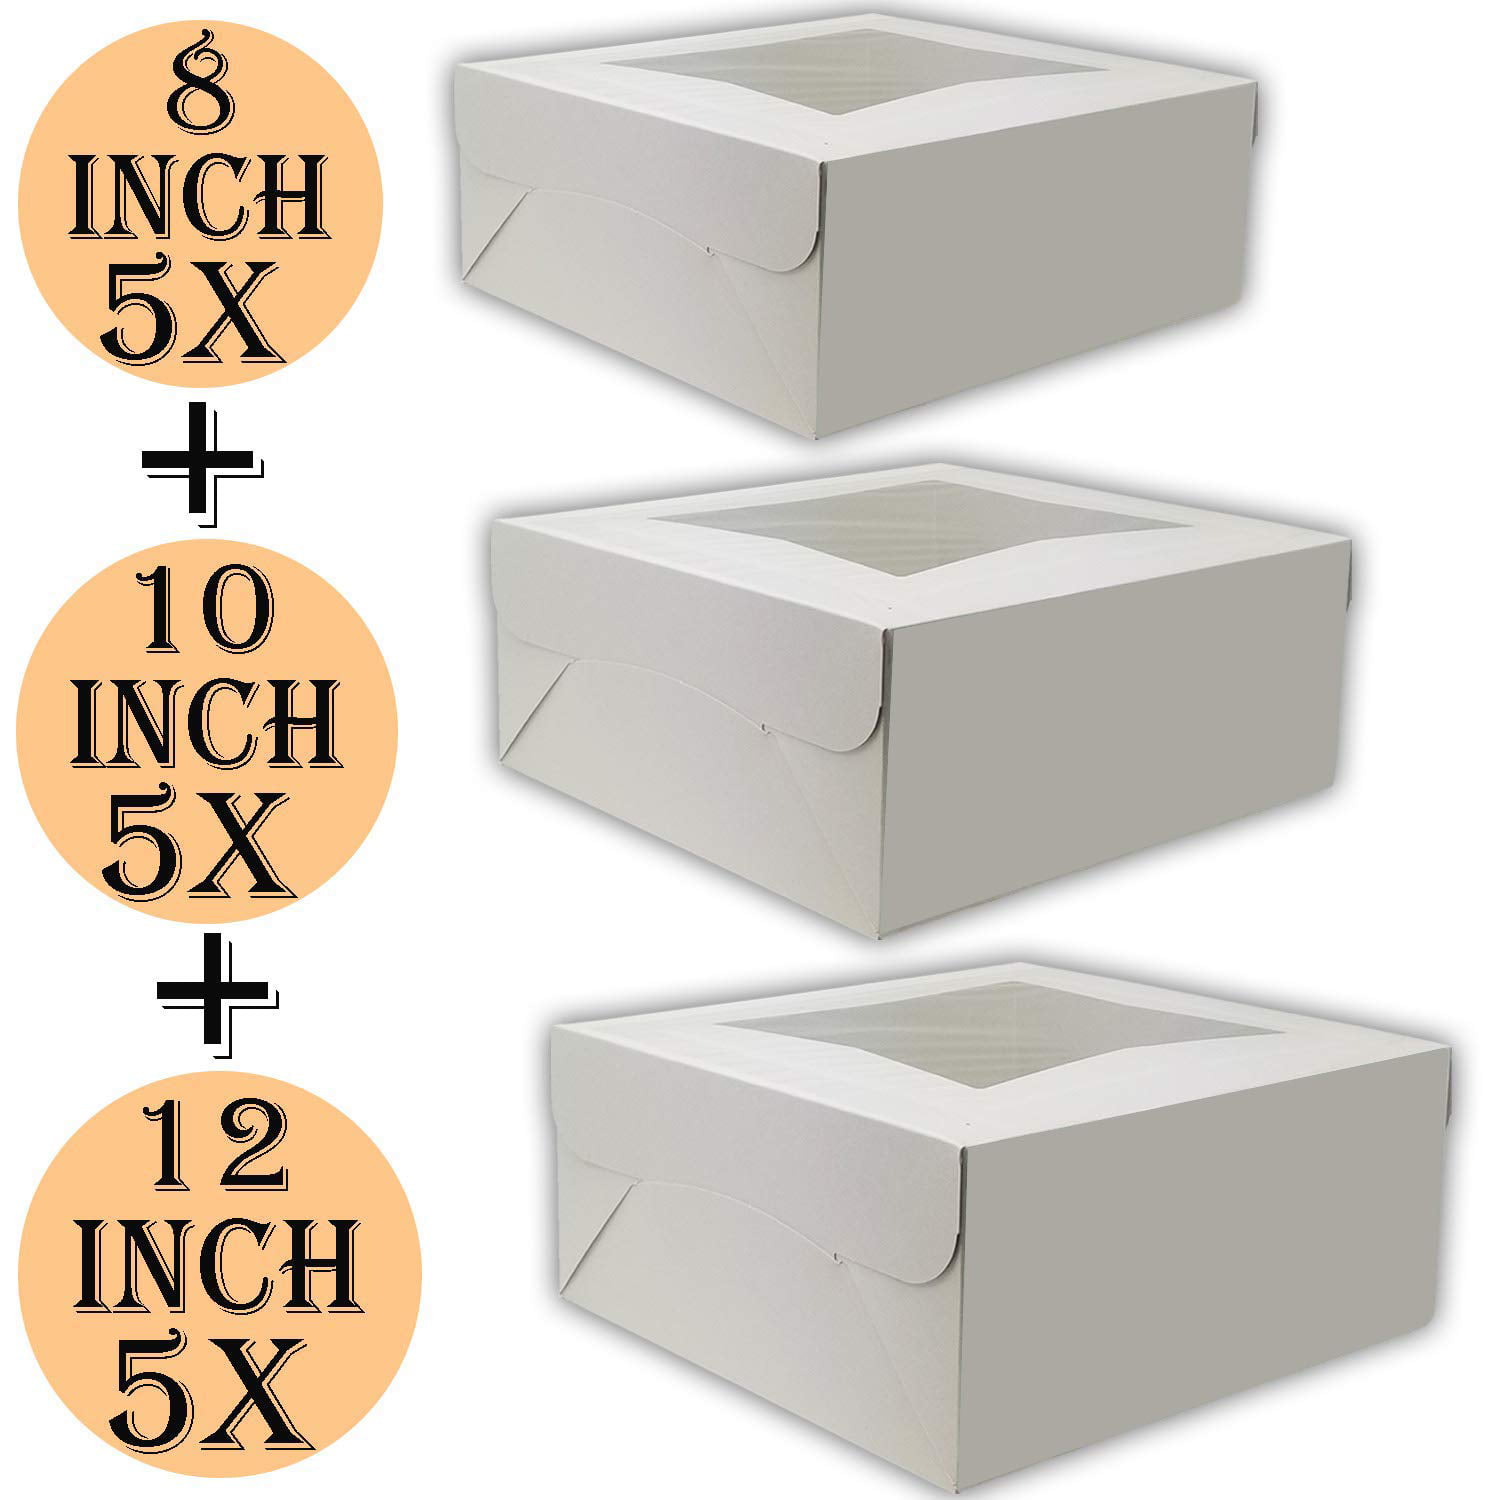 and Cake Boxes 8 x 8 x 4 Bakery Box Has Double Window, Cake Boxes 12 x 12 x 5 